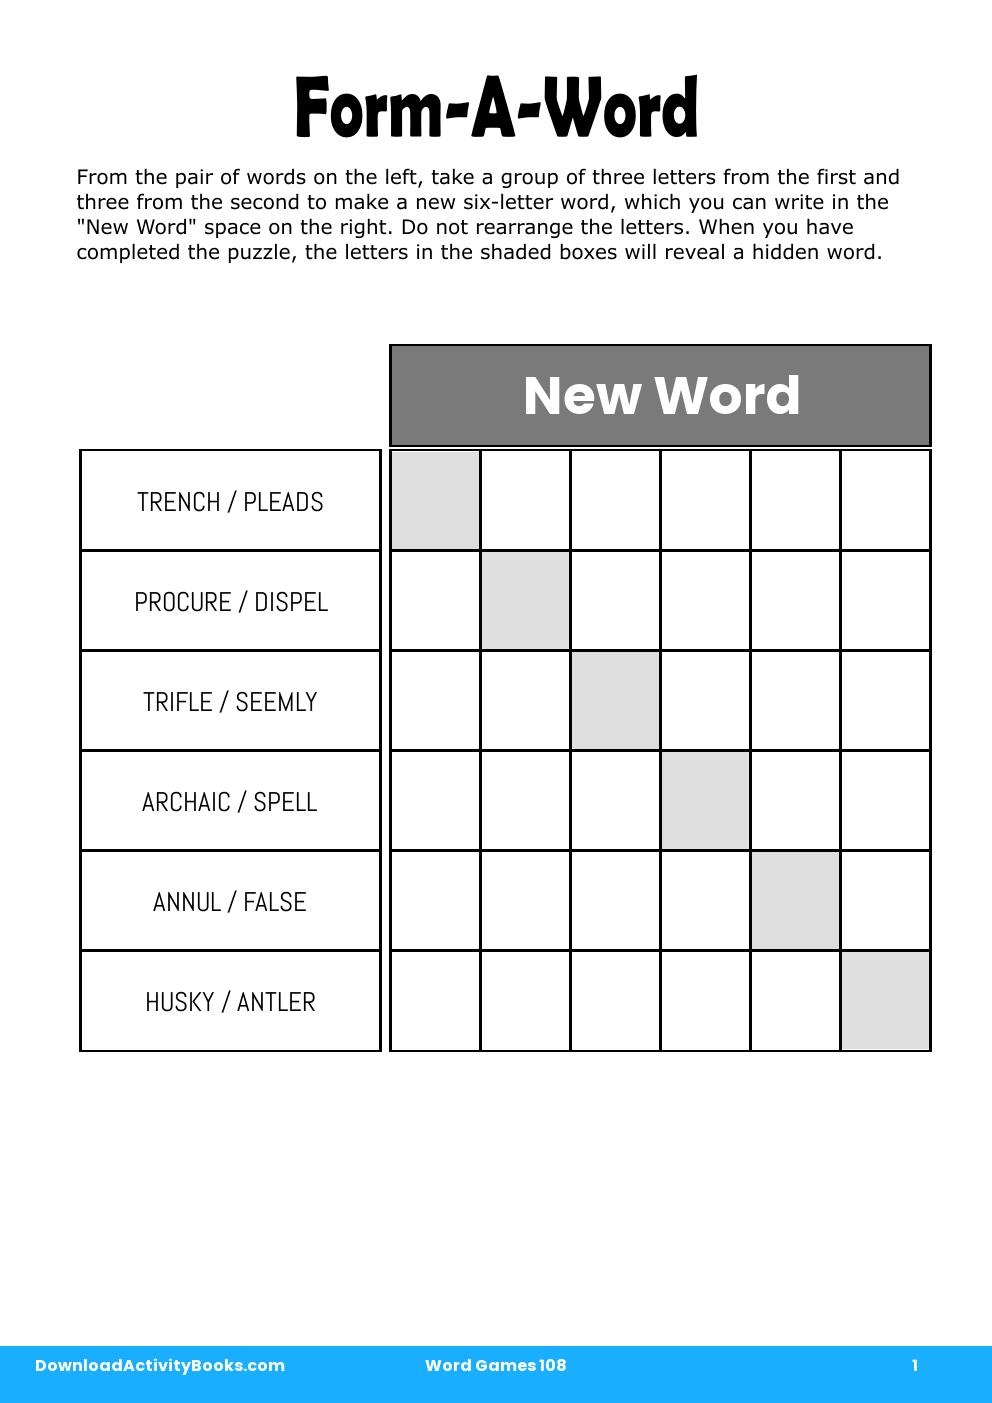 Form-A-Word in Word Games 108